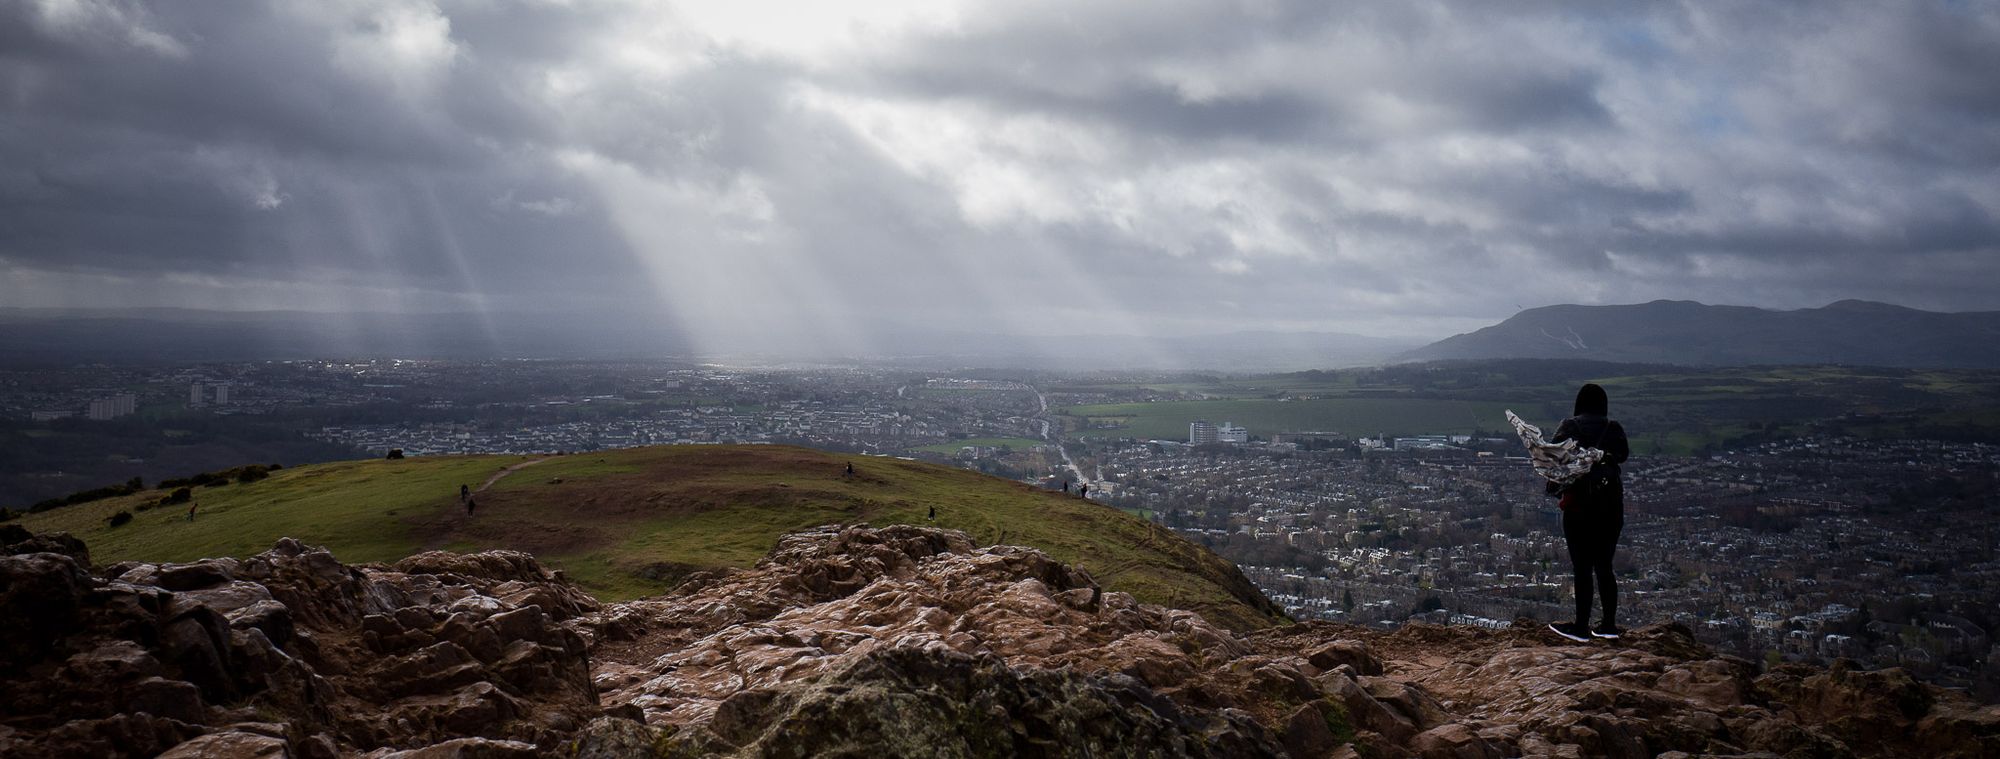 View from top of big hill in Edinburgh. A person stands to the right looking out.